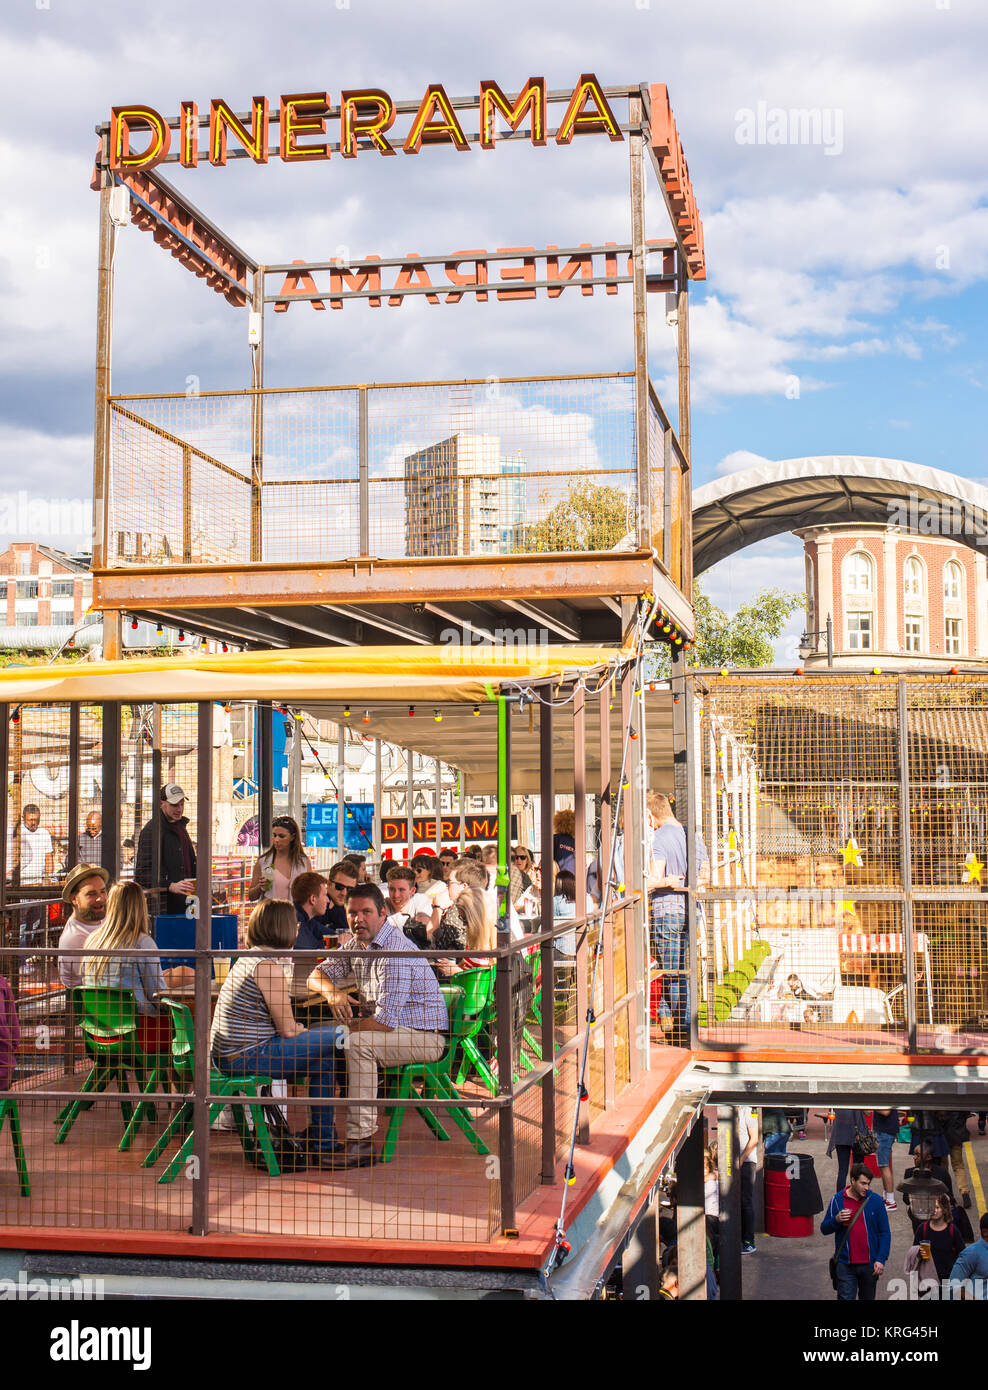 Pop-up street food market venue called Dinerama popular among young trendy people in Shoreditch Yard,19 Great Eastern Street, London, UK Stock Photo